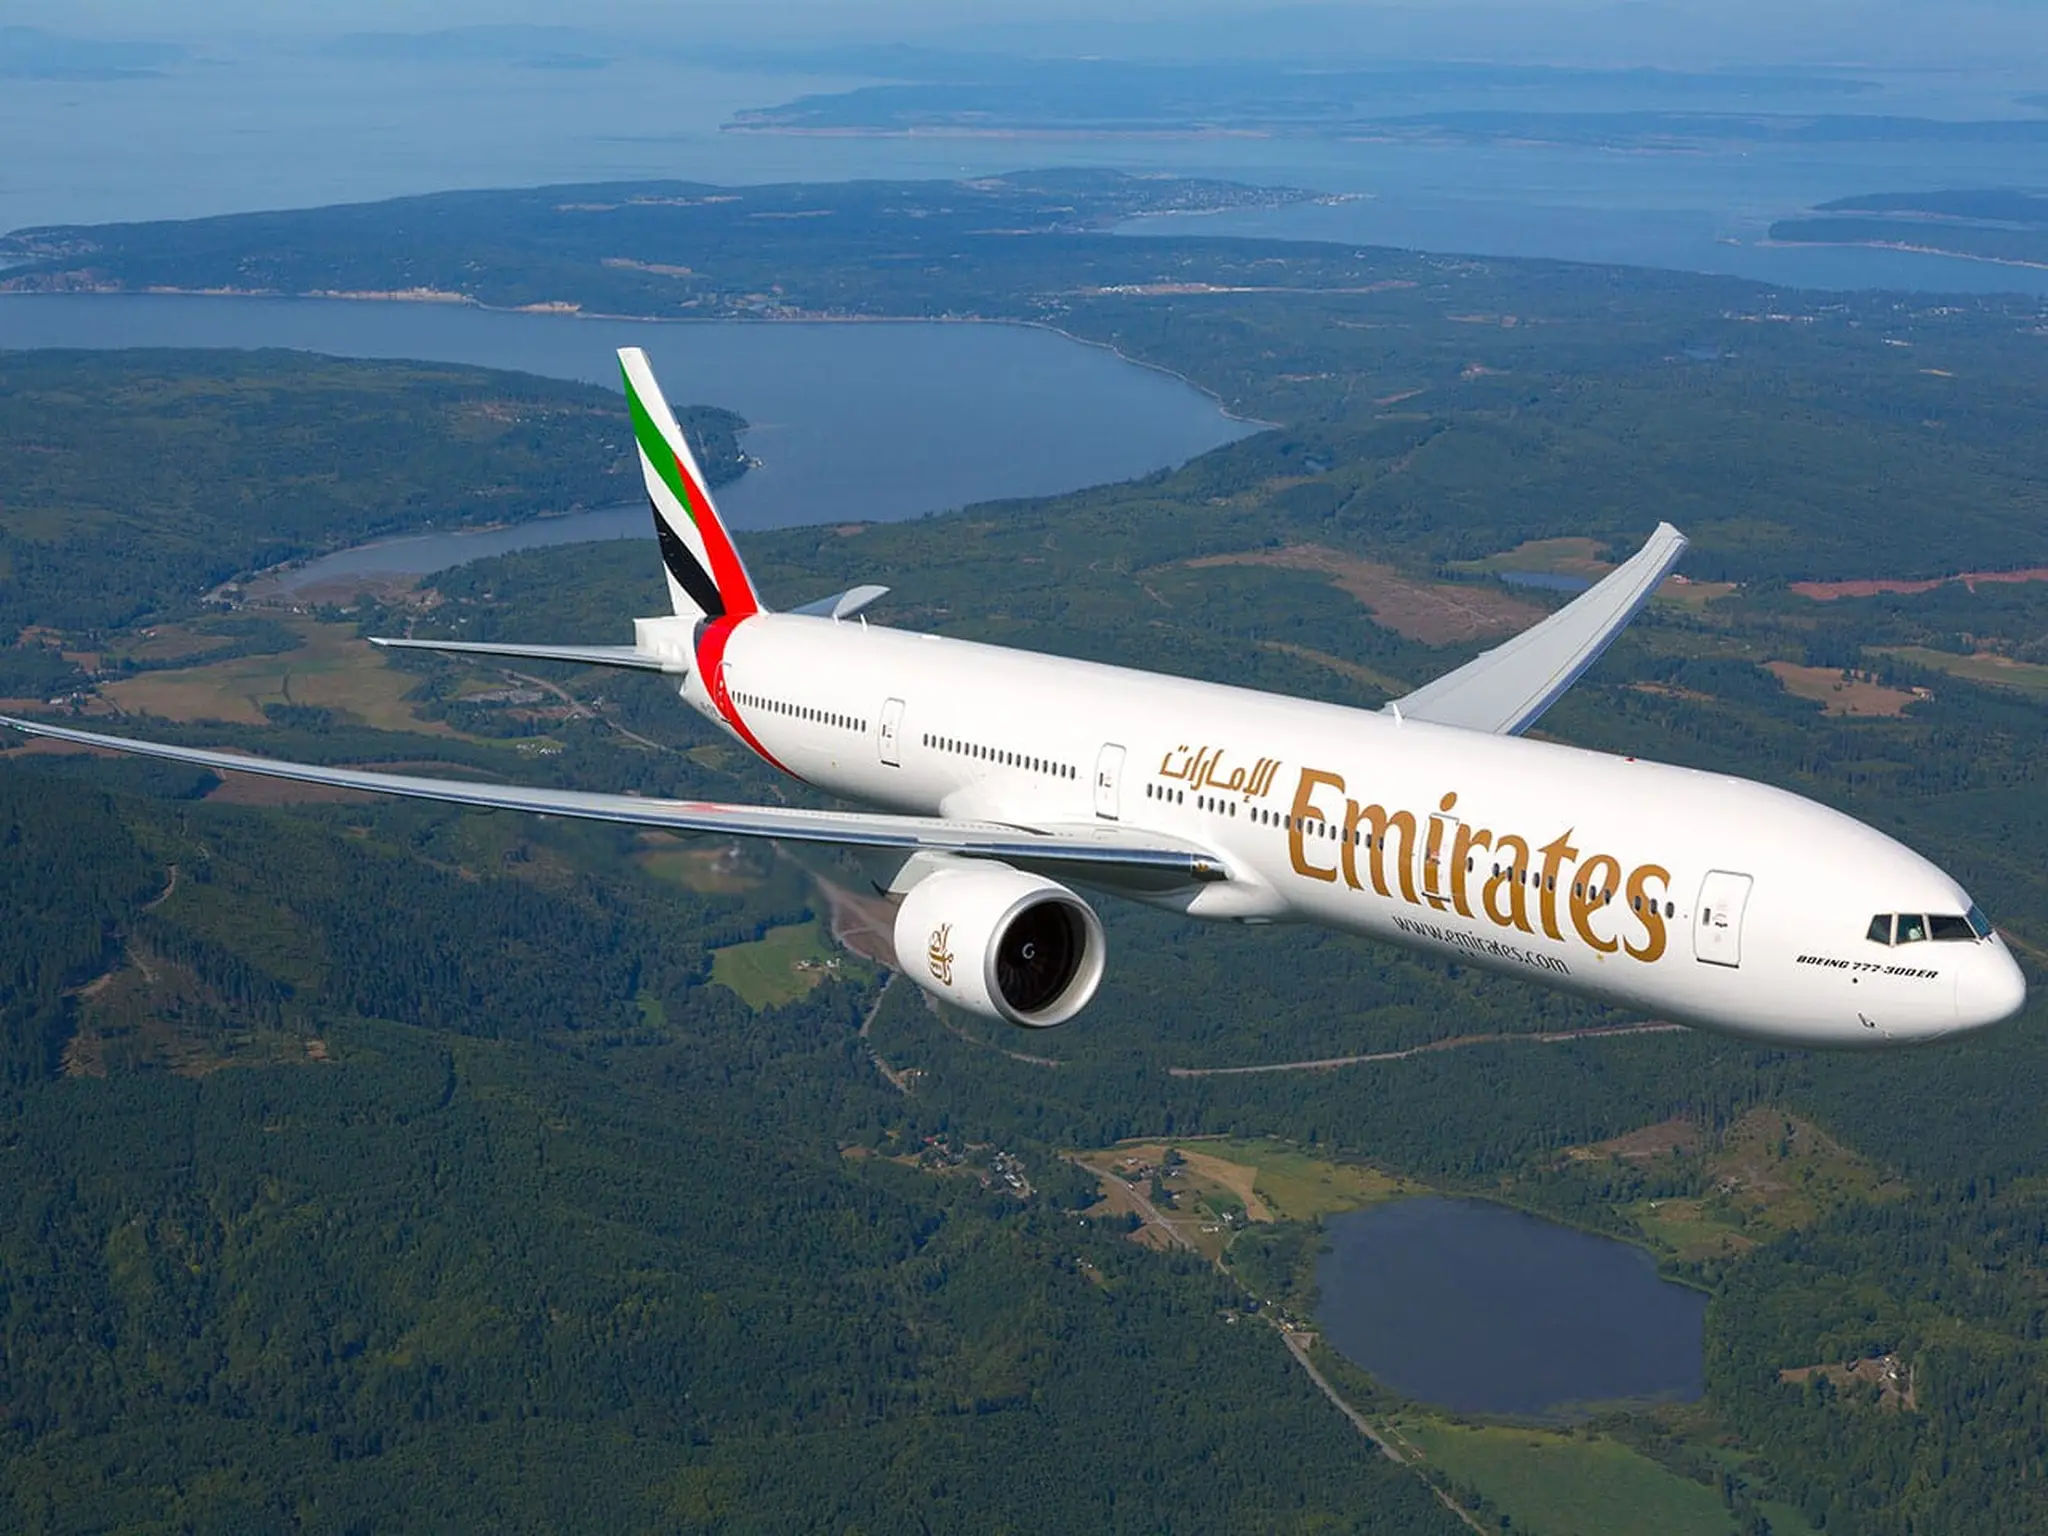 Urgent.. A statement from Emirates Airlines regarding the cancellation of these flights